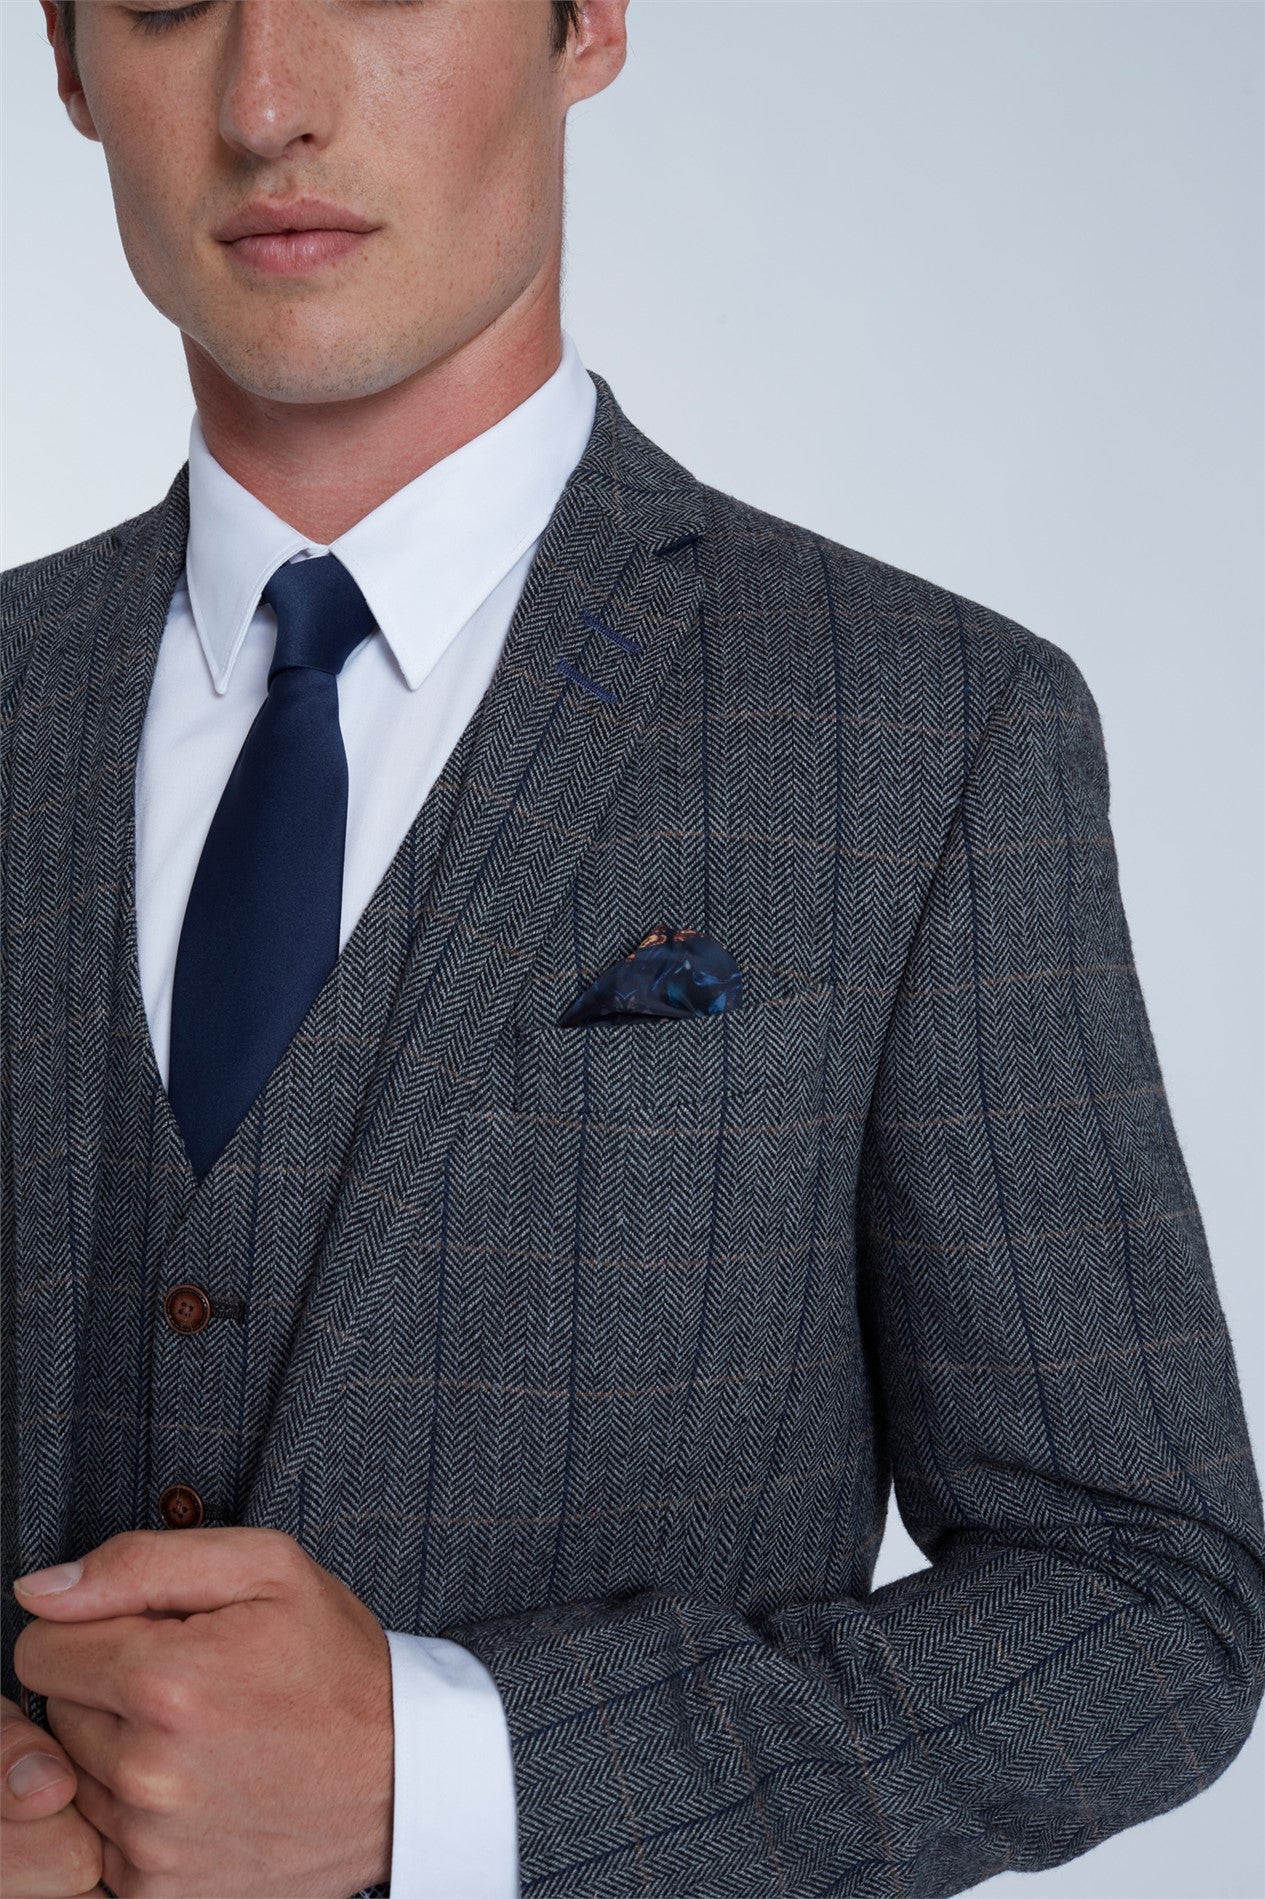 Grey Tweed Over Check Suit from Antique Rogue - Jacket